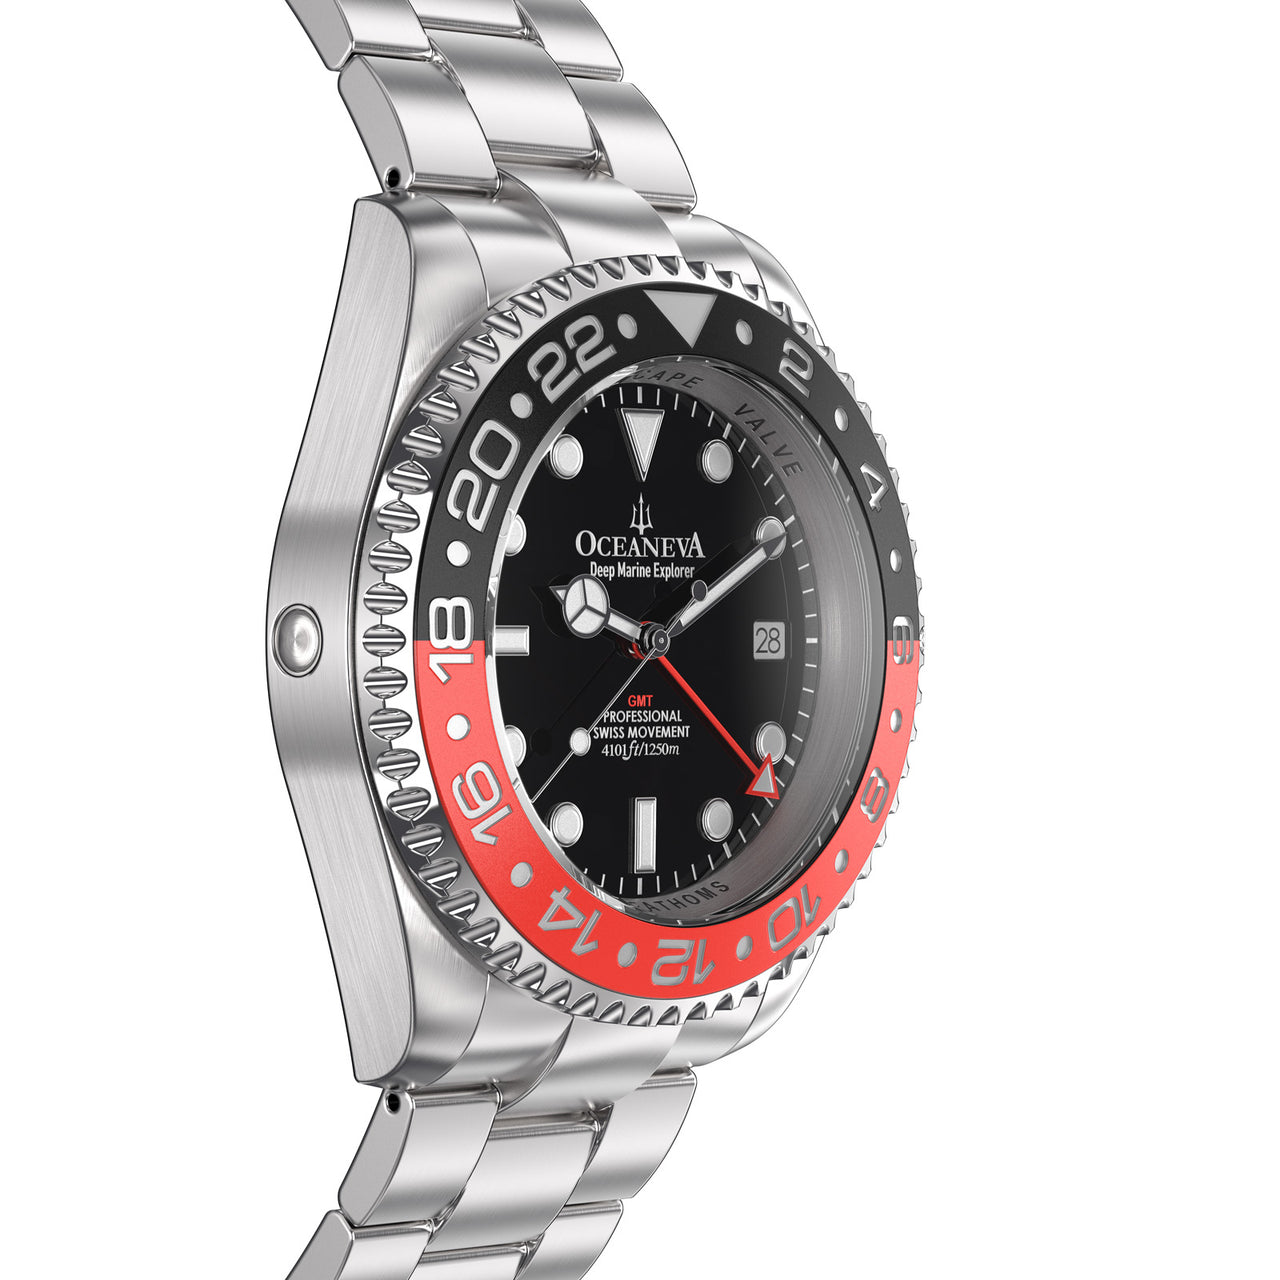 Oceaneva 1250M GMT Dive Watch Red And Black Side Helium Escape Valve View